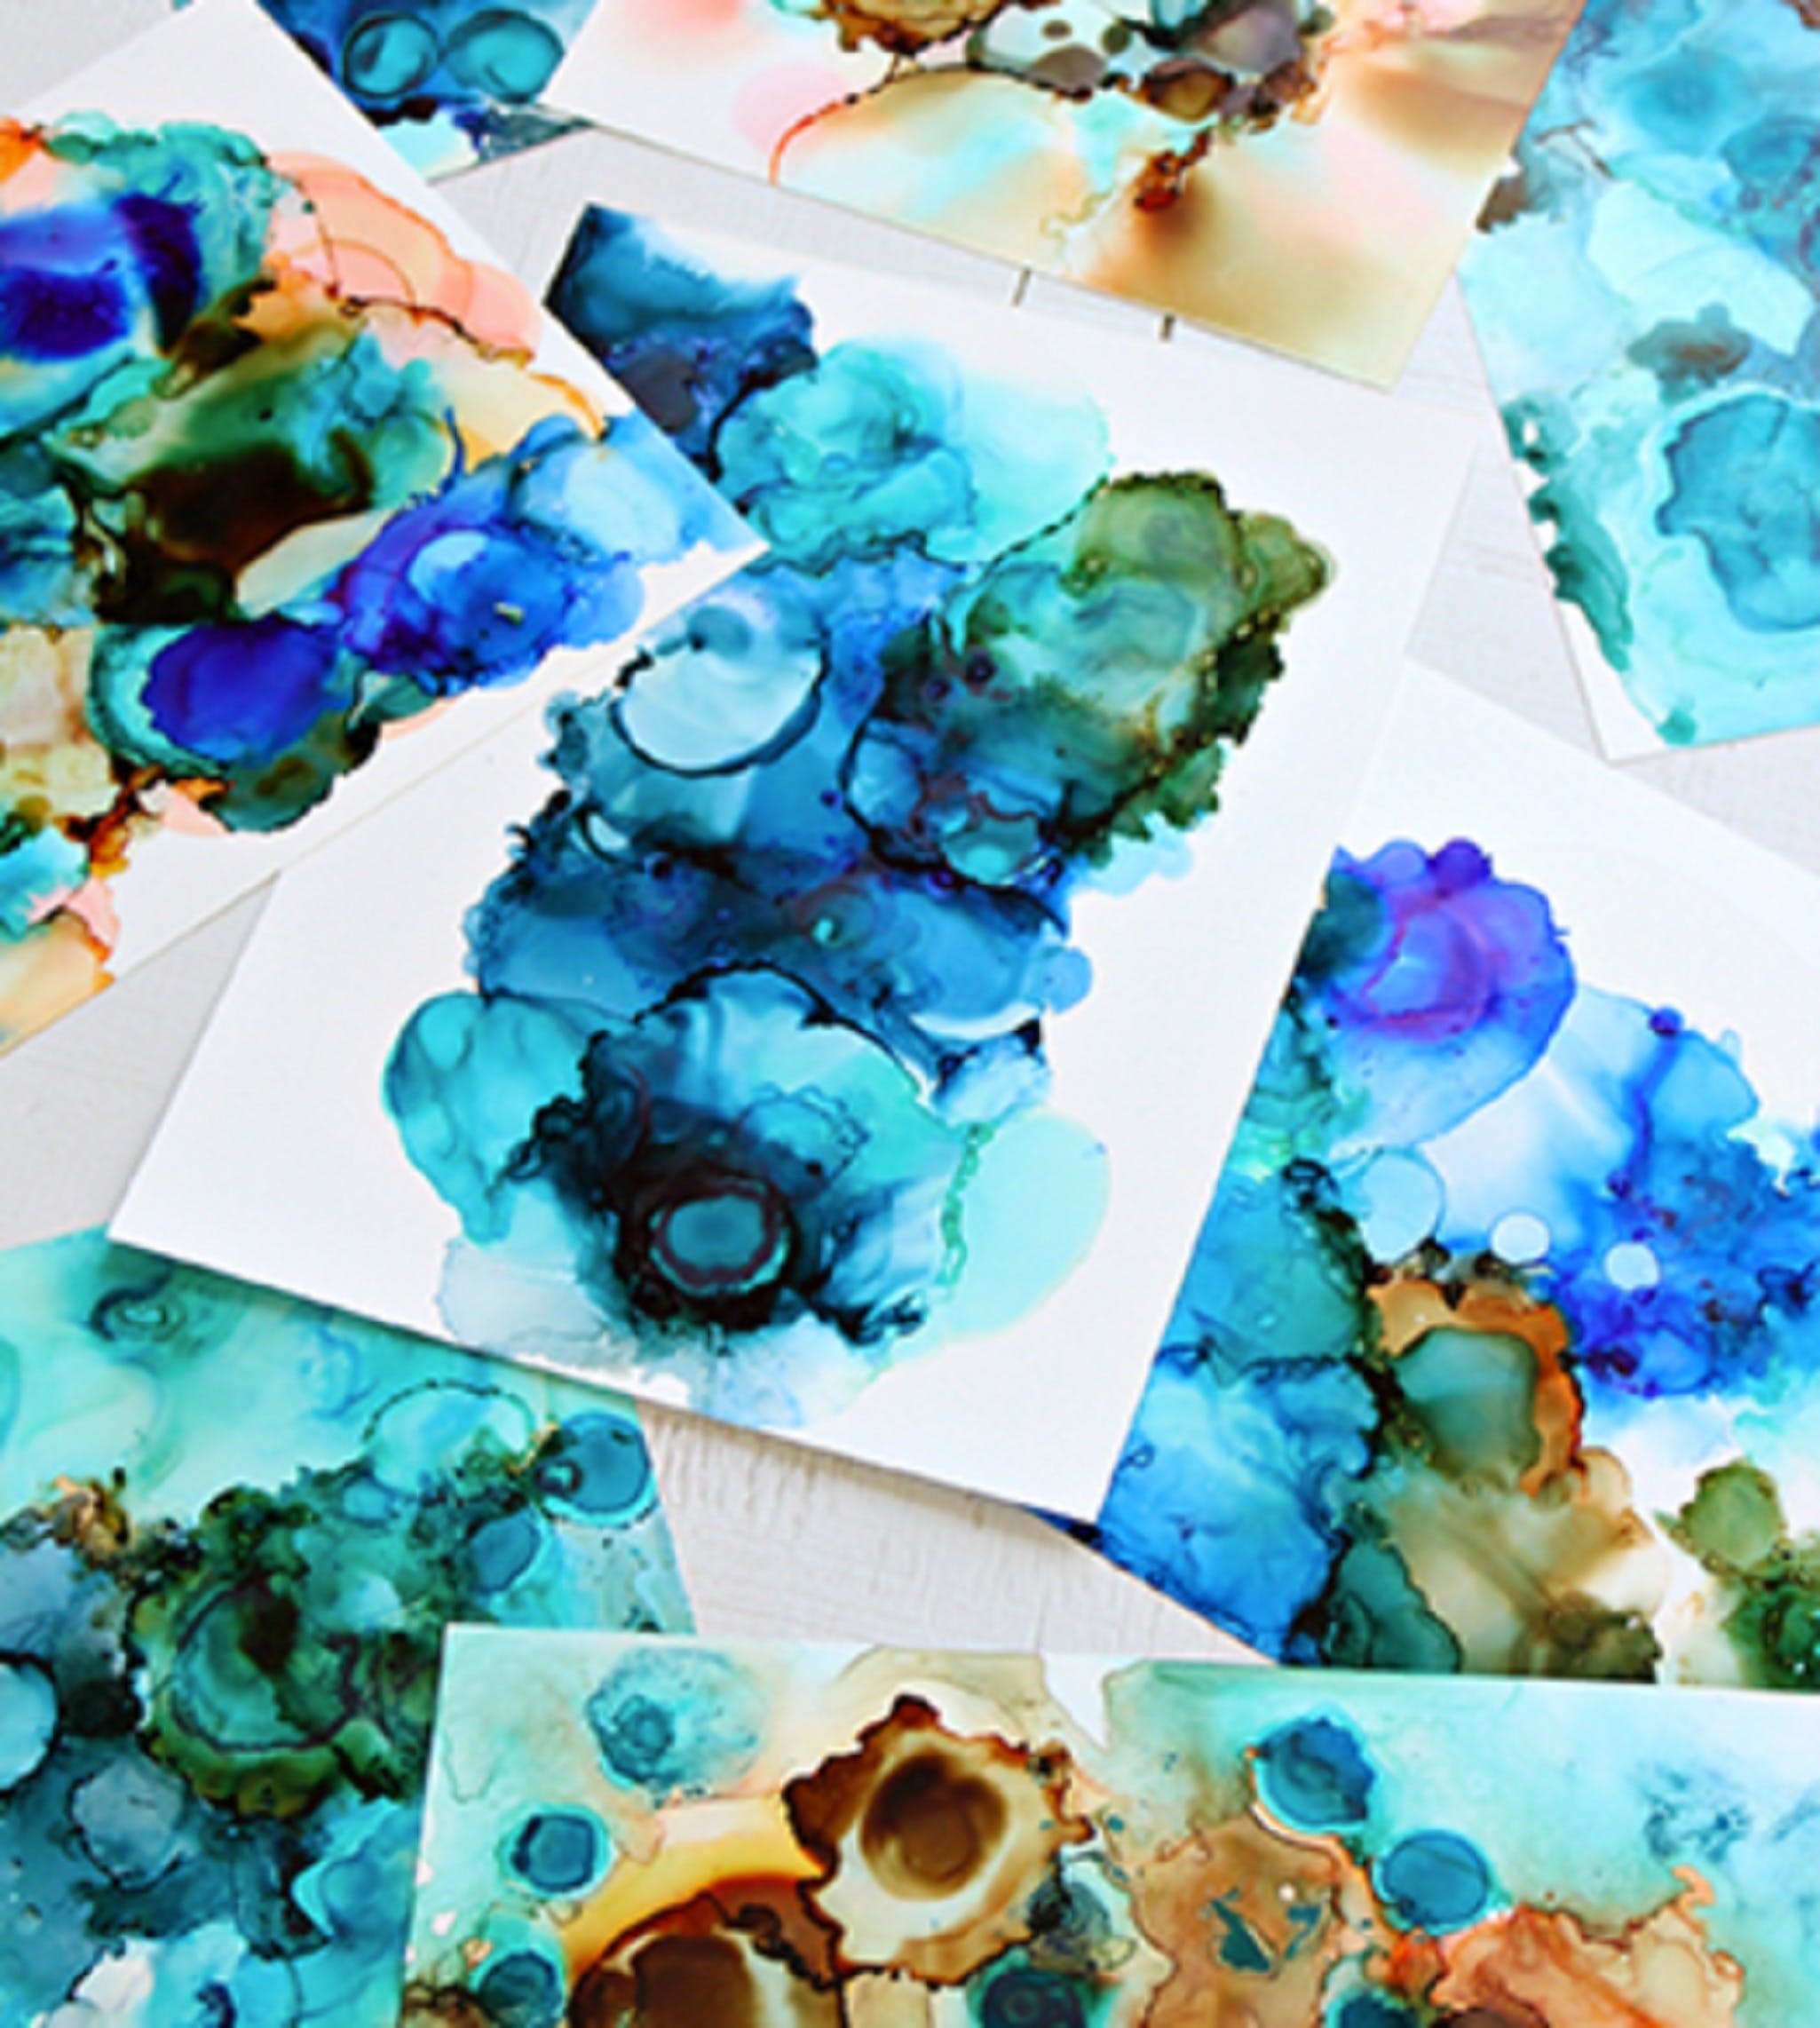 Alcohol Ink Art Class - Accommodation Cooktown